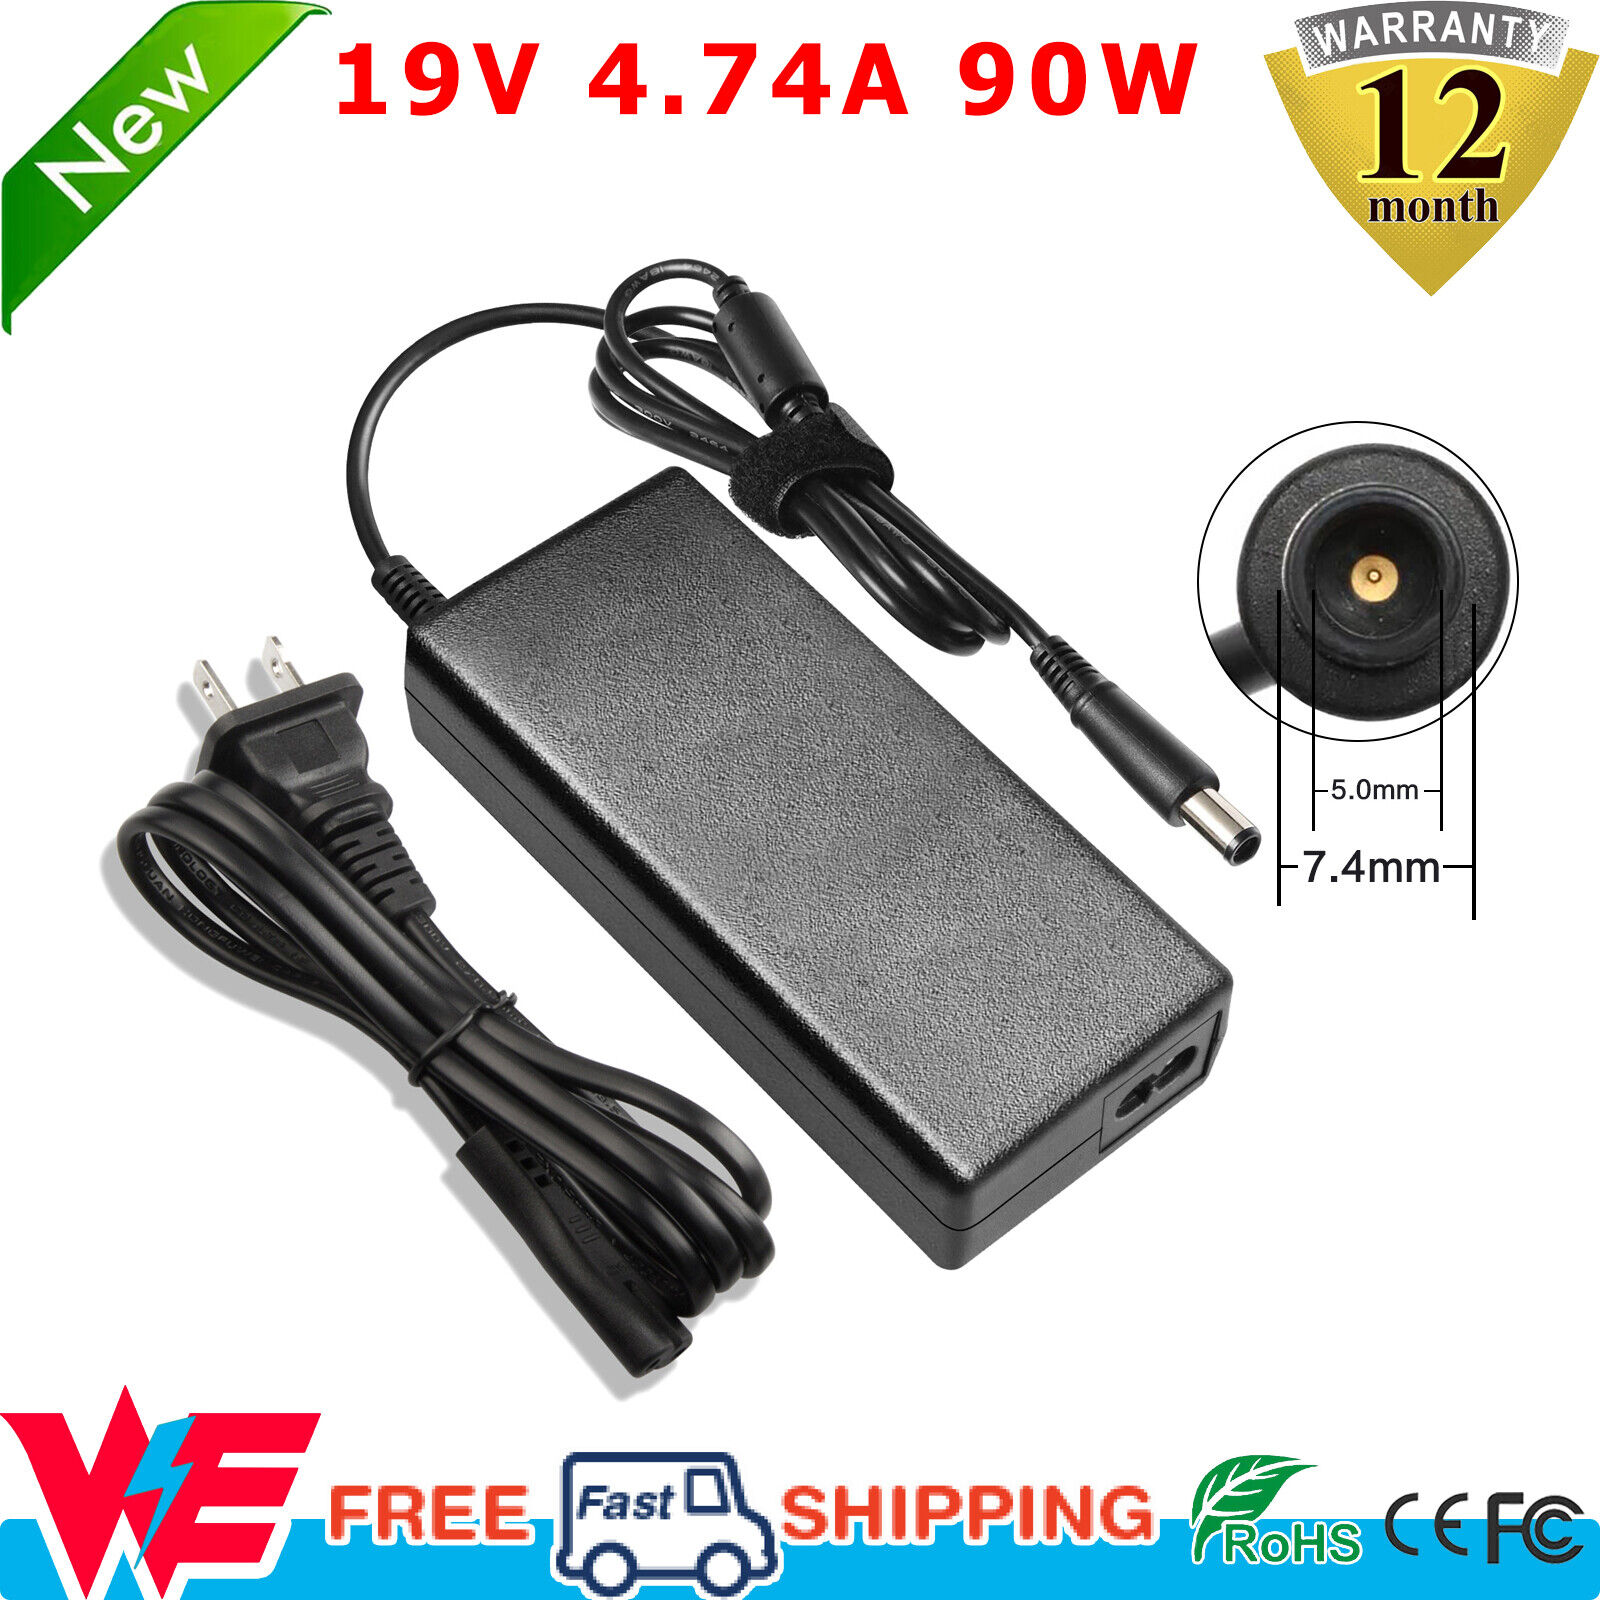 90W AC Power Adapter for HP Compaq 391173-001 6930p 6735b 6910p 8510p 8510w 8710